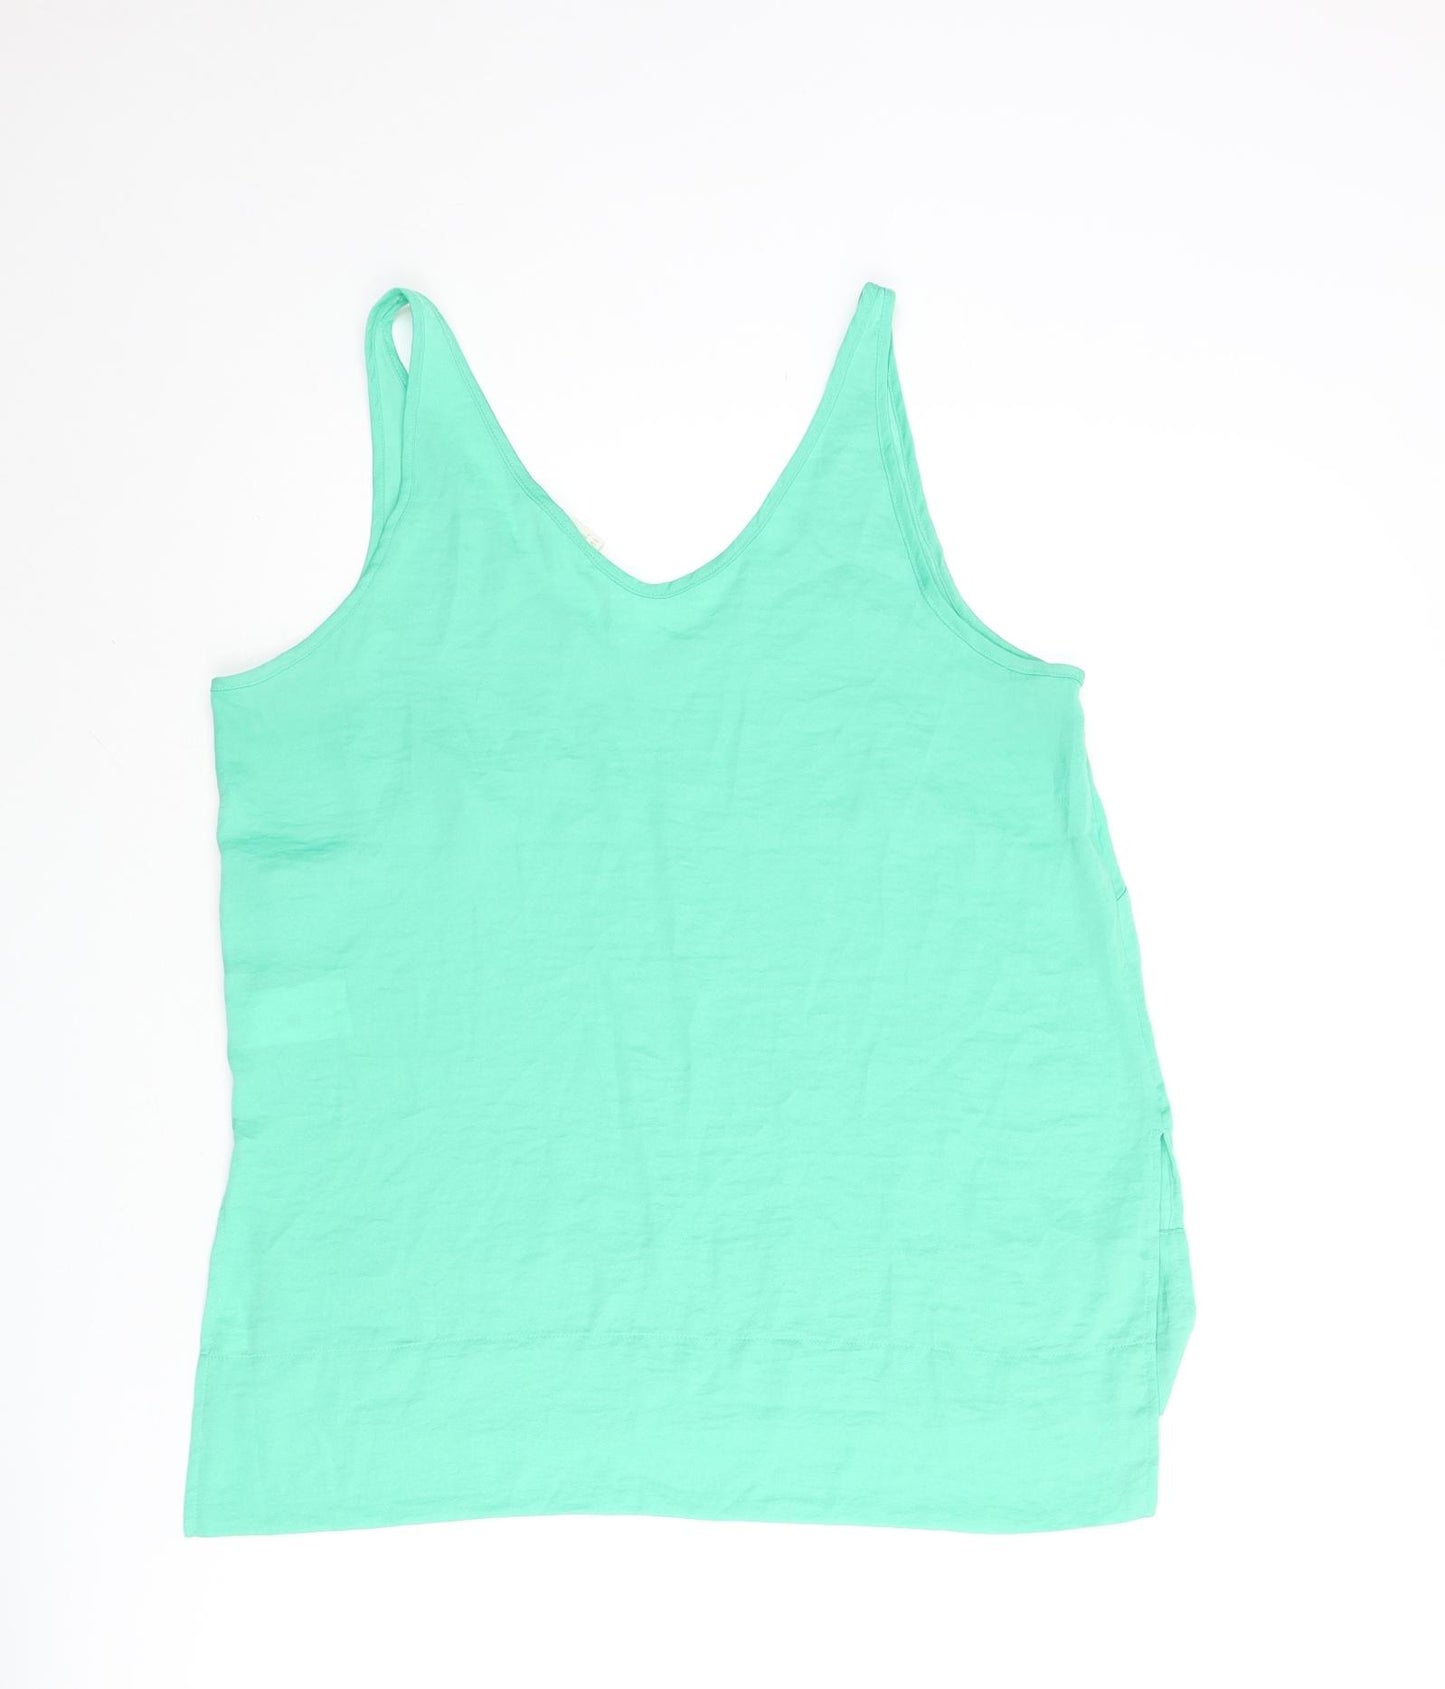 H&M Womens Green Polyester Camisole Blouse Size 10 Scoop Neck